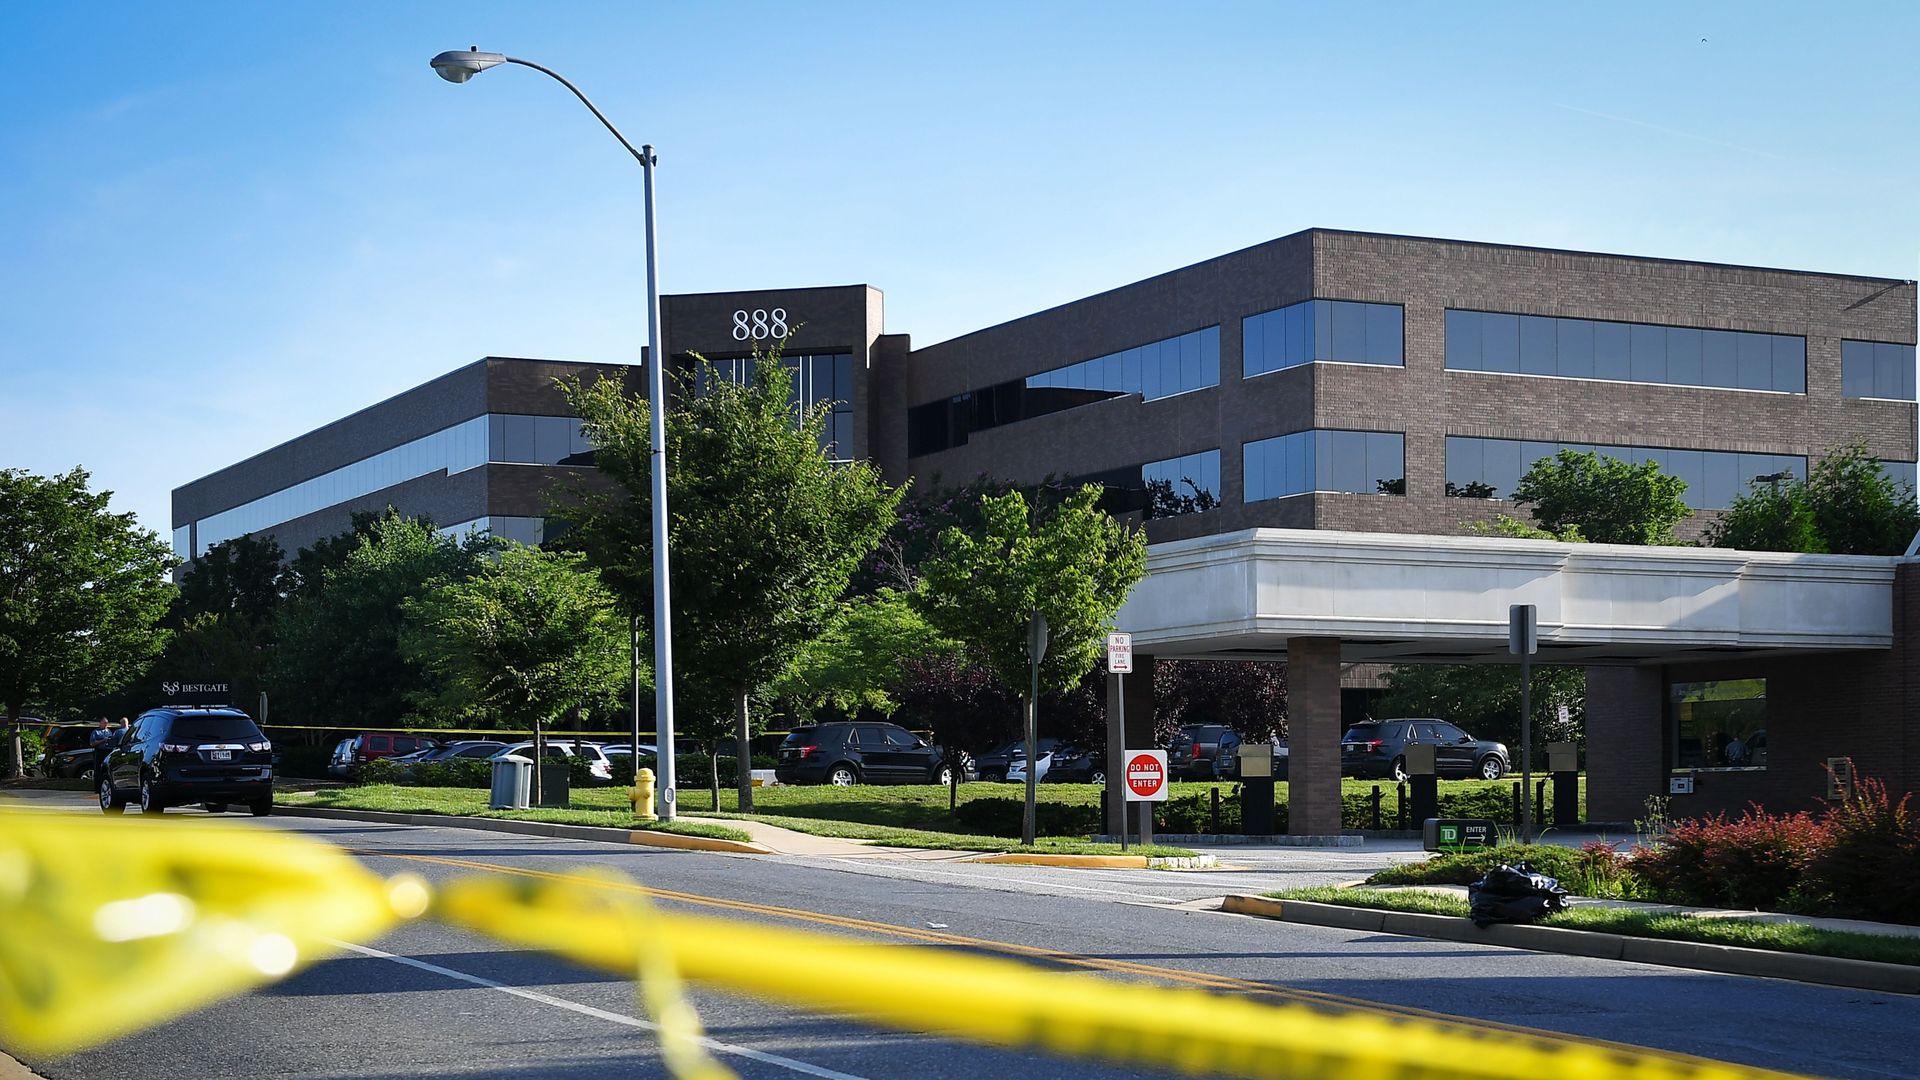 Picture of the building where Capital Gazette offices were located in Maryland